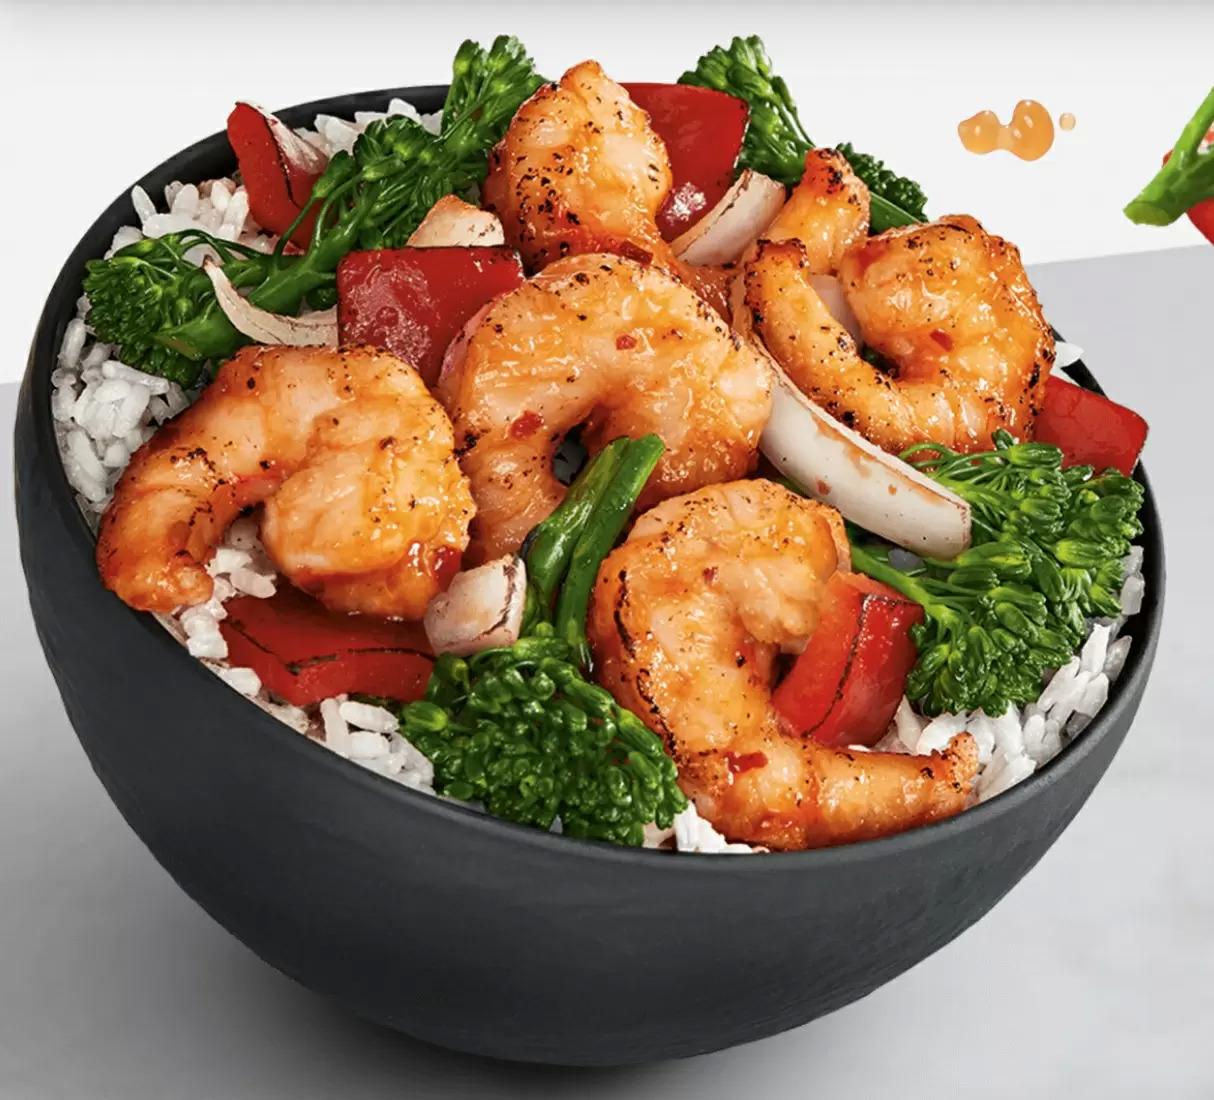 Panda Express Sizzling Shrimp for Free With Purchase